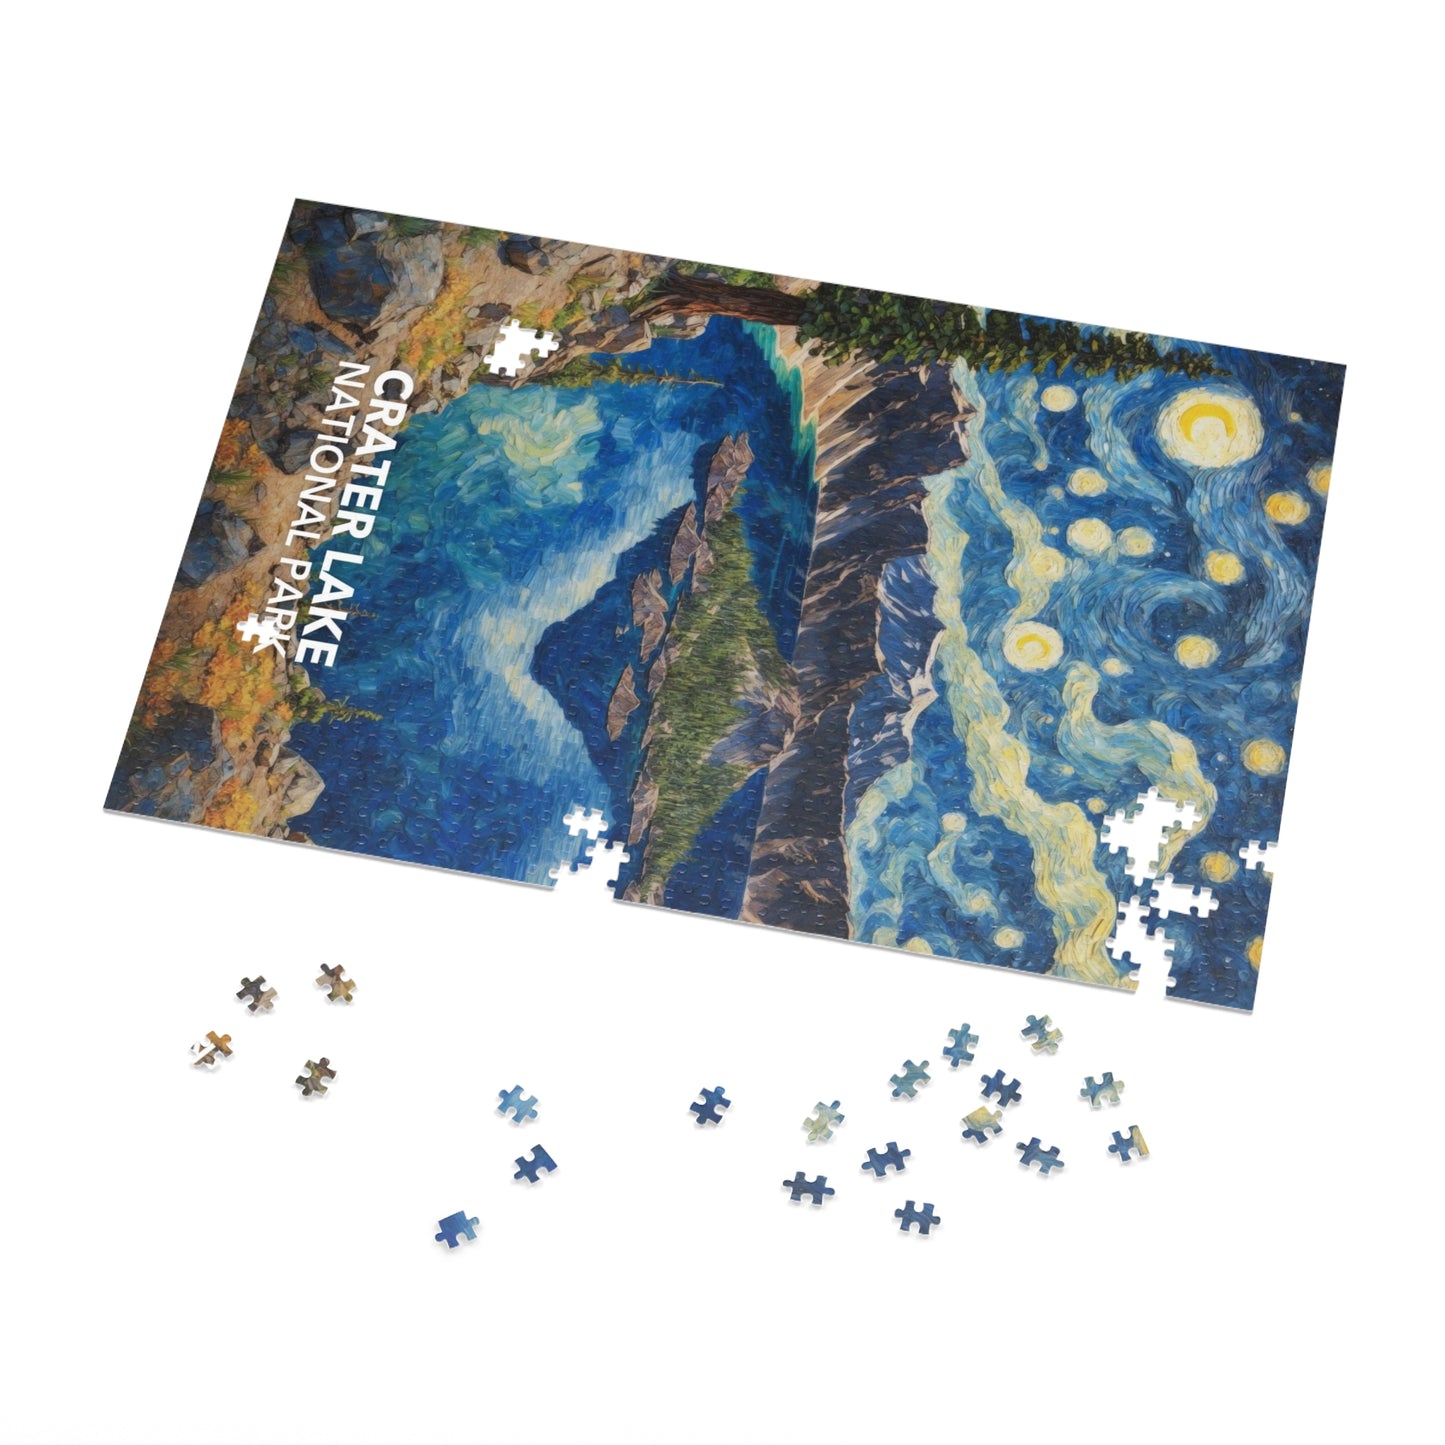 Crater Lake National Park Jigsaw Puzzle - The Starry Night